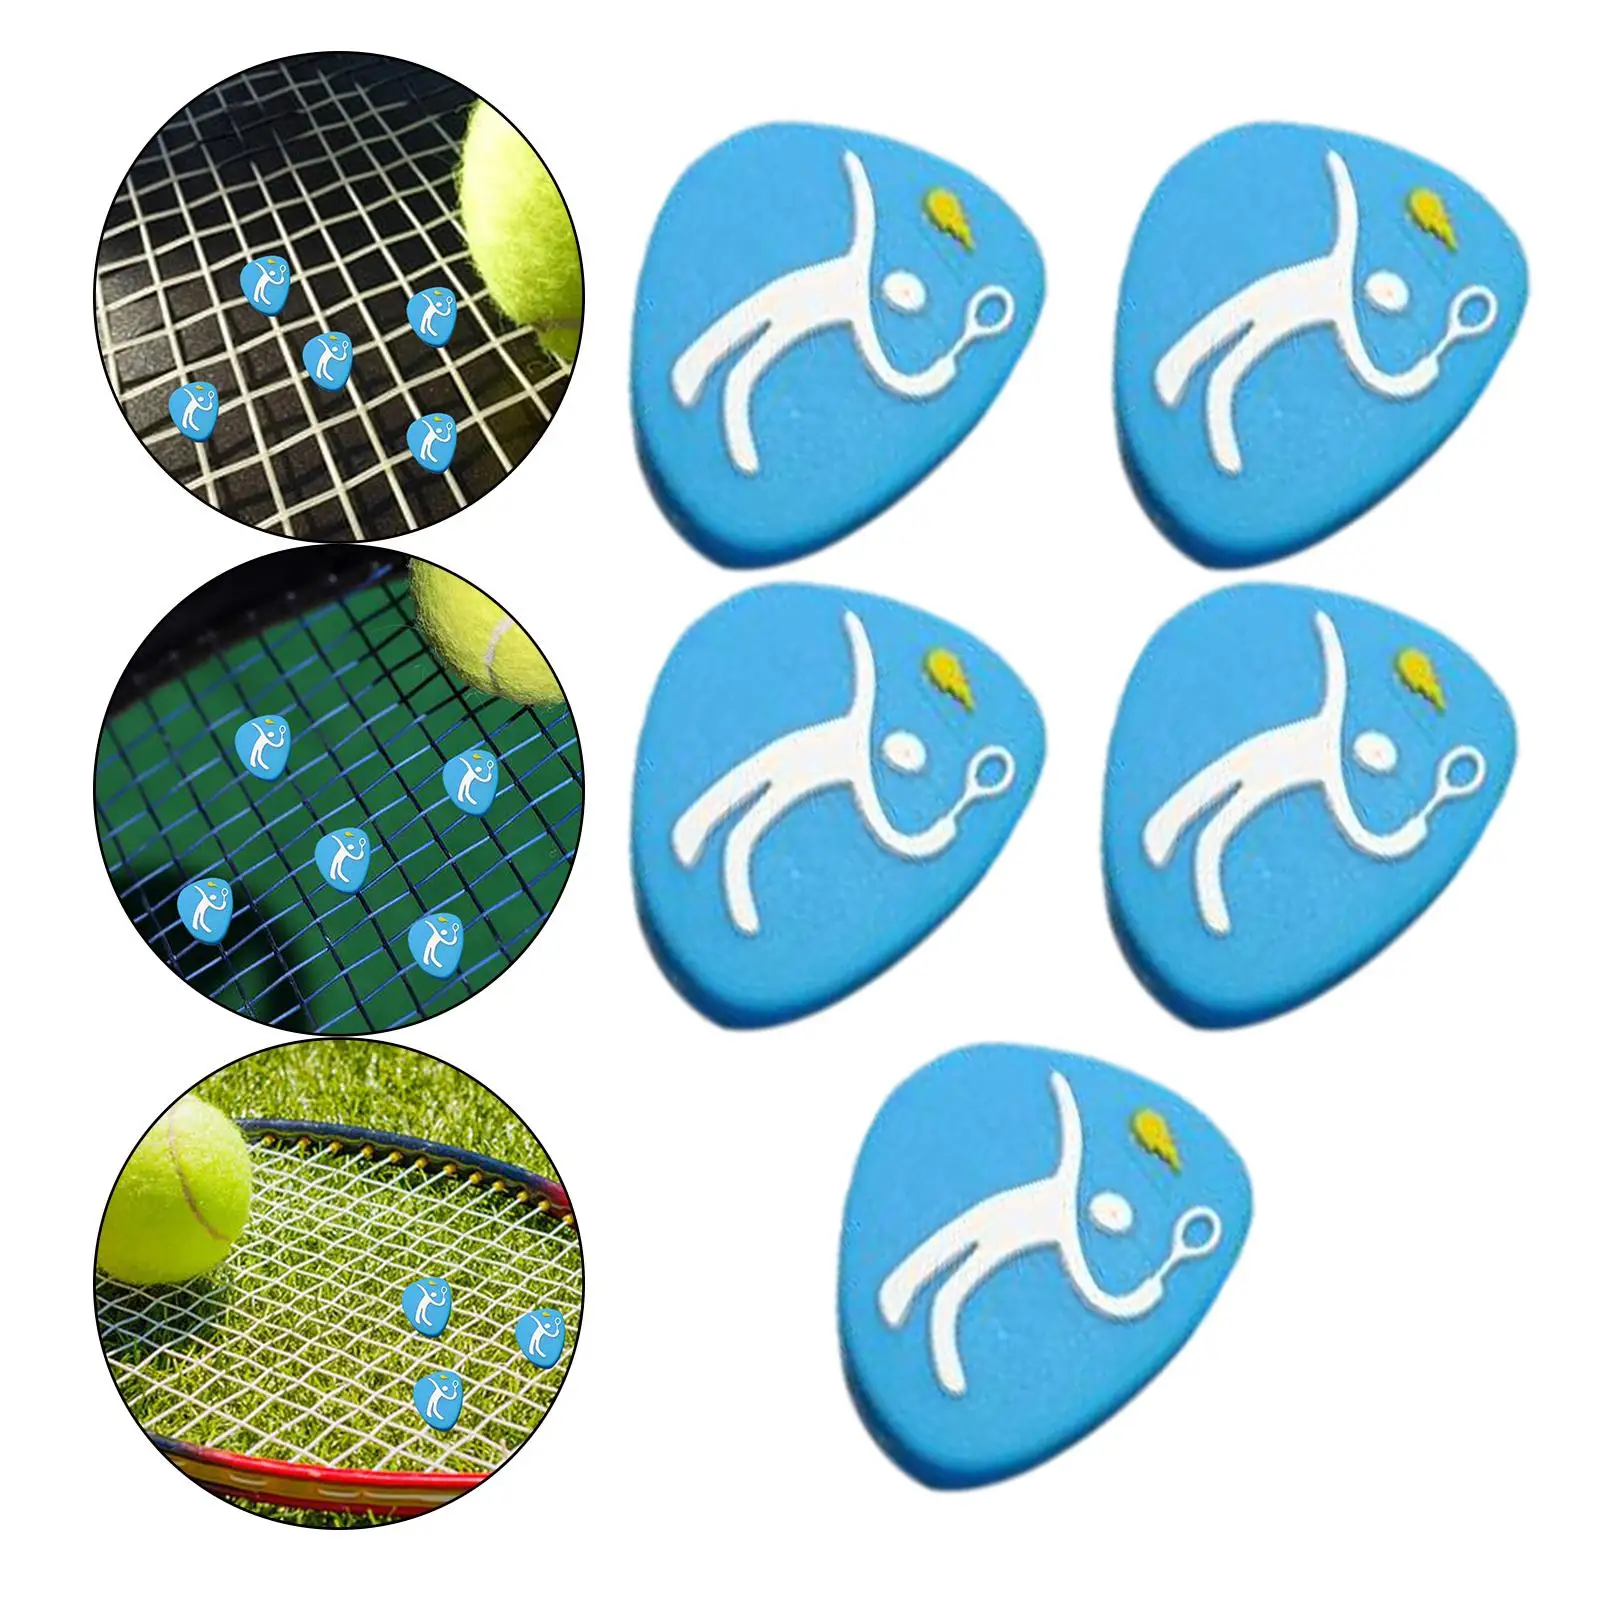 5Pcs Silicone Tennis Vibration Dampener Shock Absorber Shock Absorption Tennis Dampener Damper Players Gift Accessories